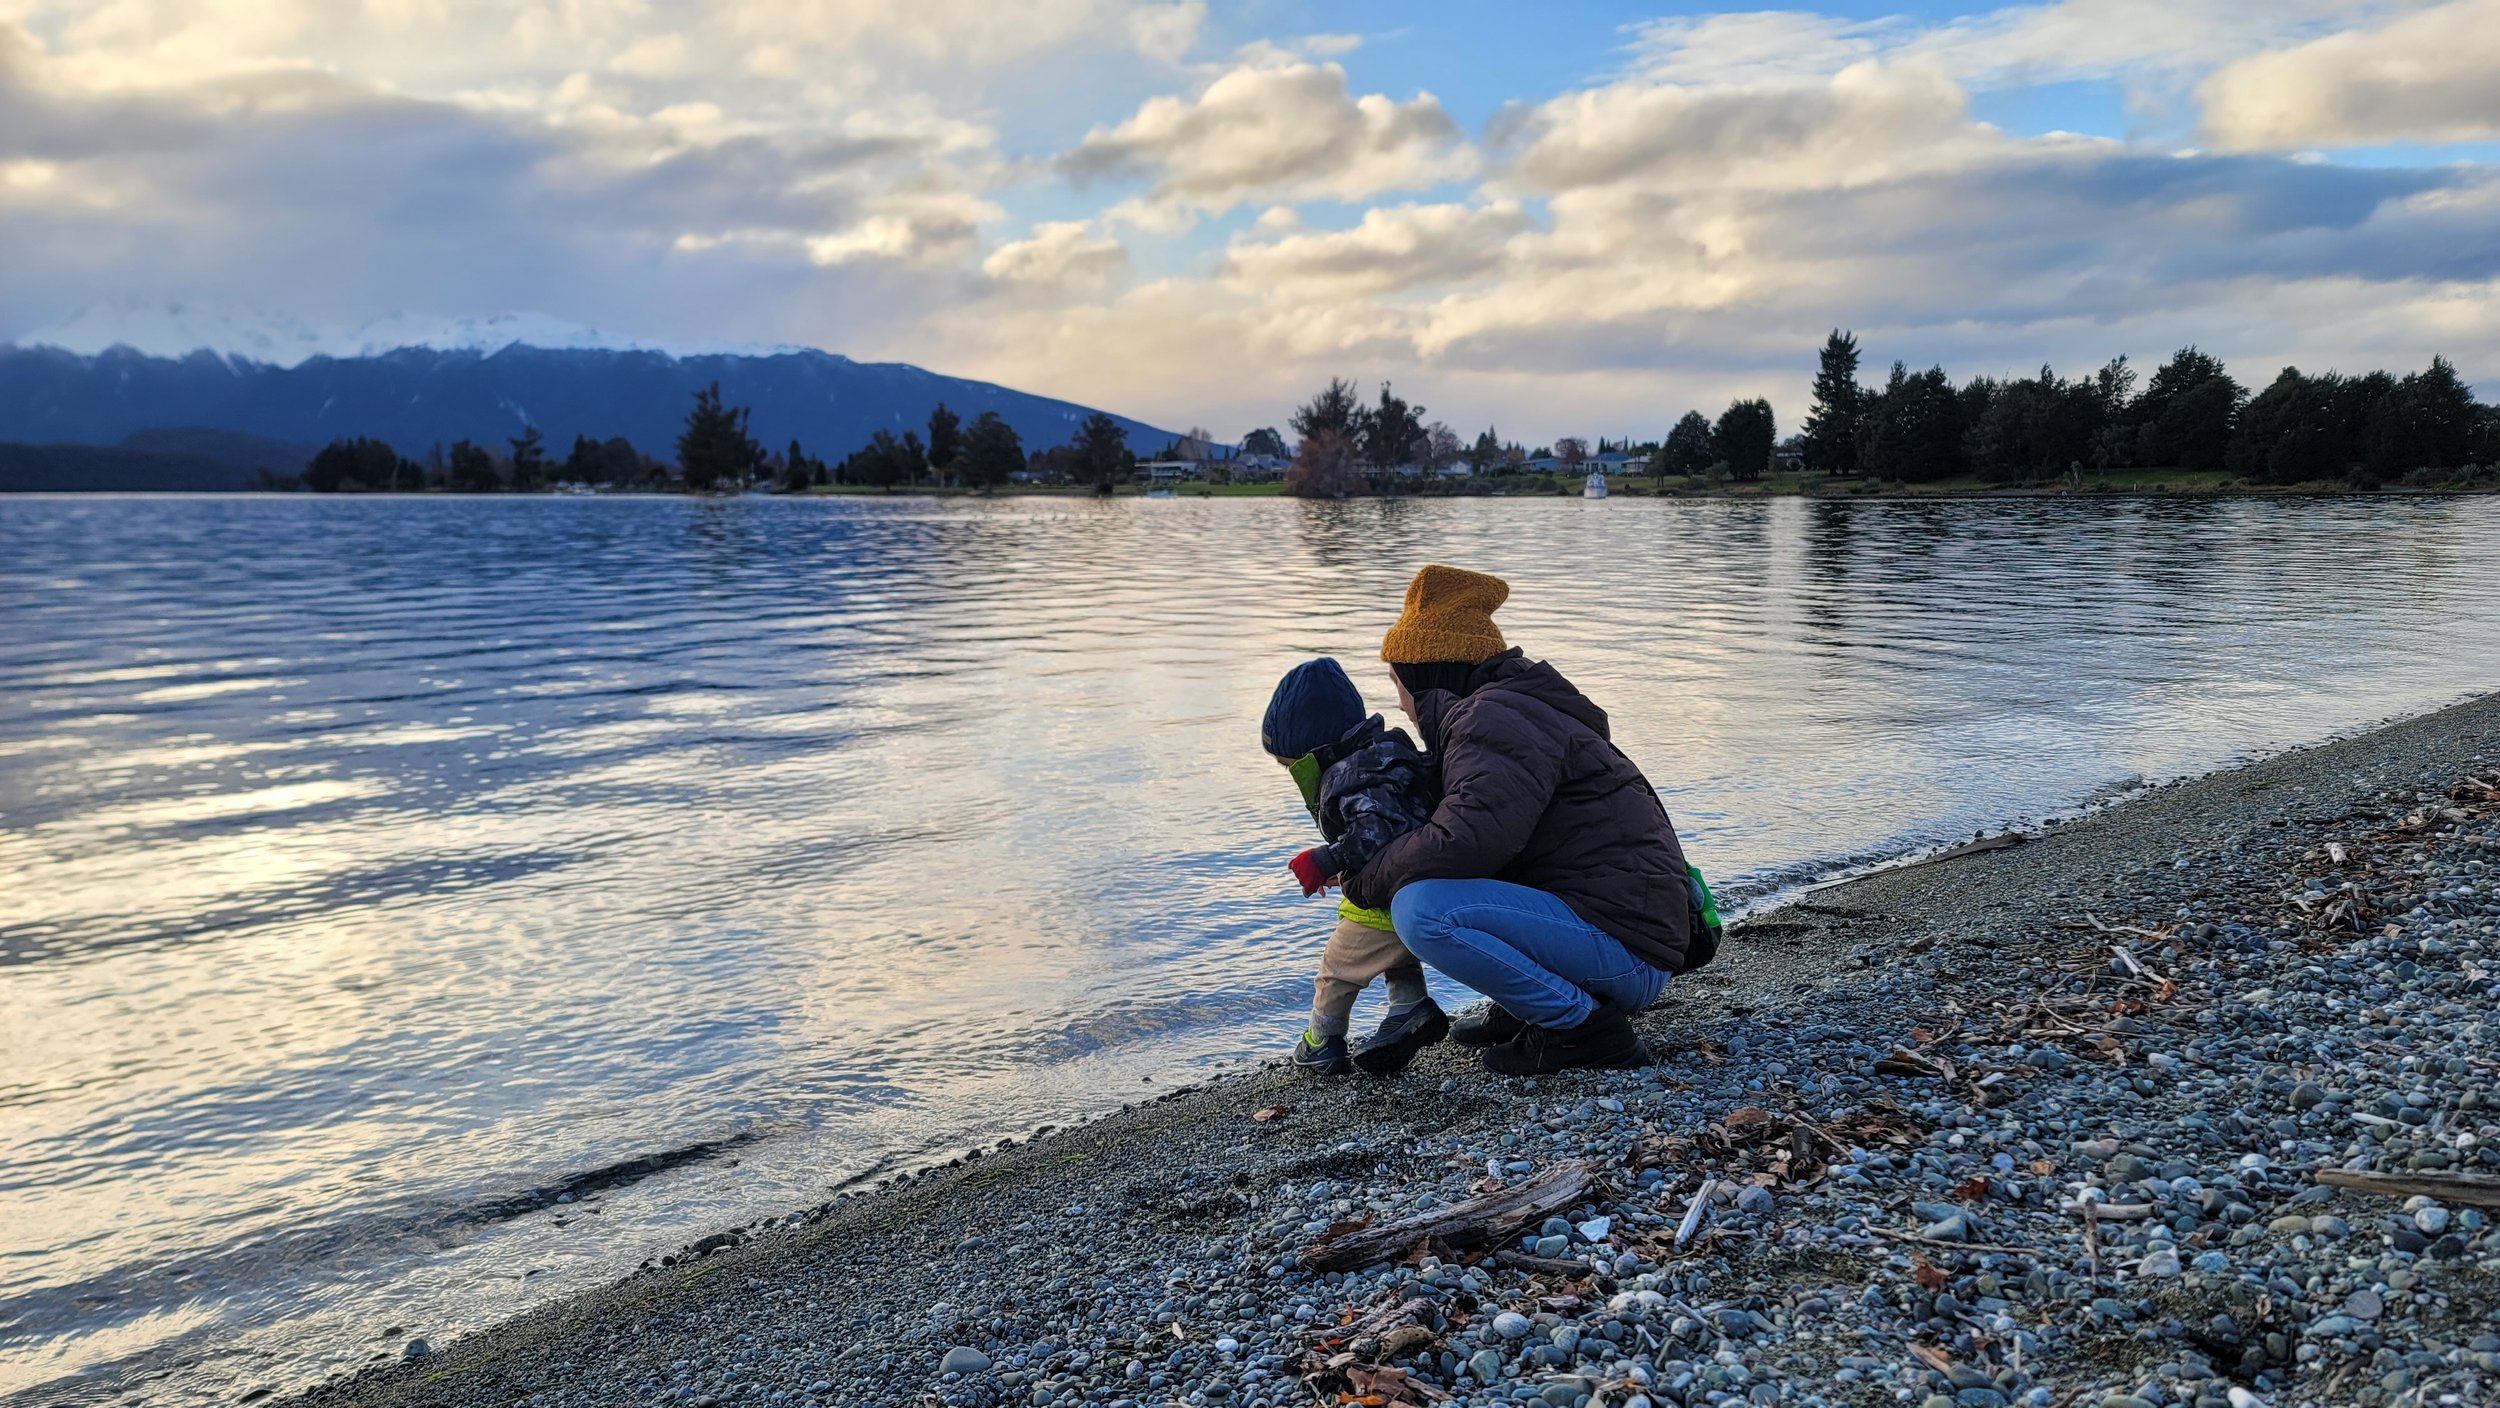  After a nice afternoon stroll around lake Te Anau, we stopped by the rocky “beach” to take in the sunset together. 